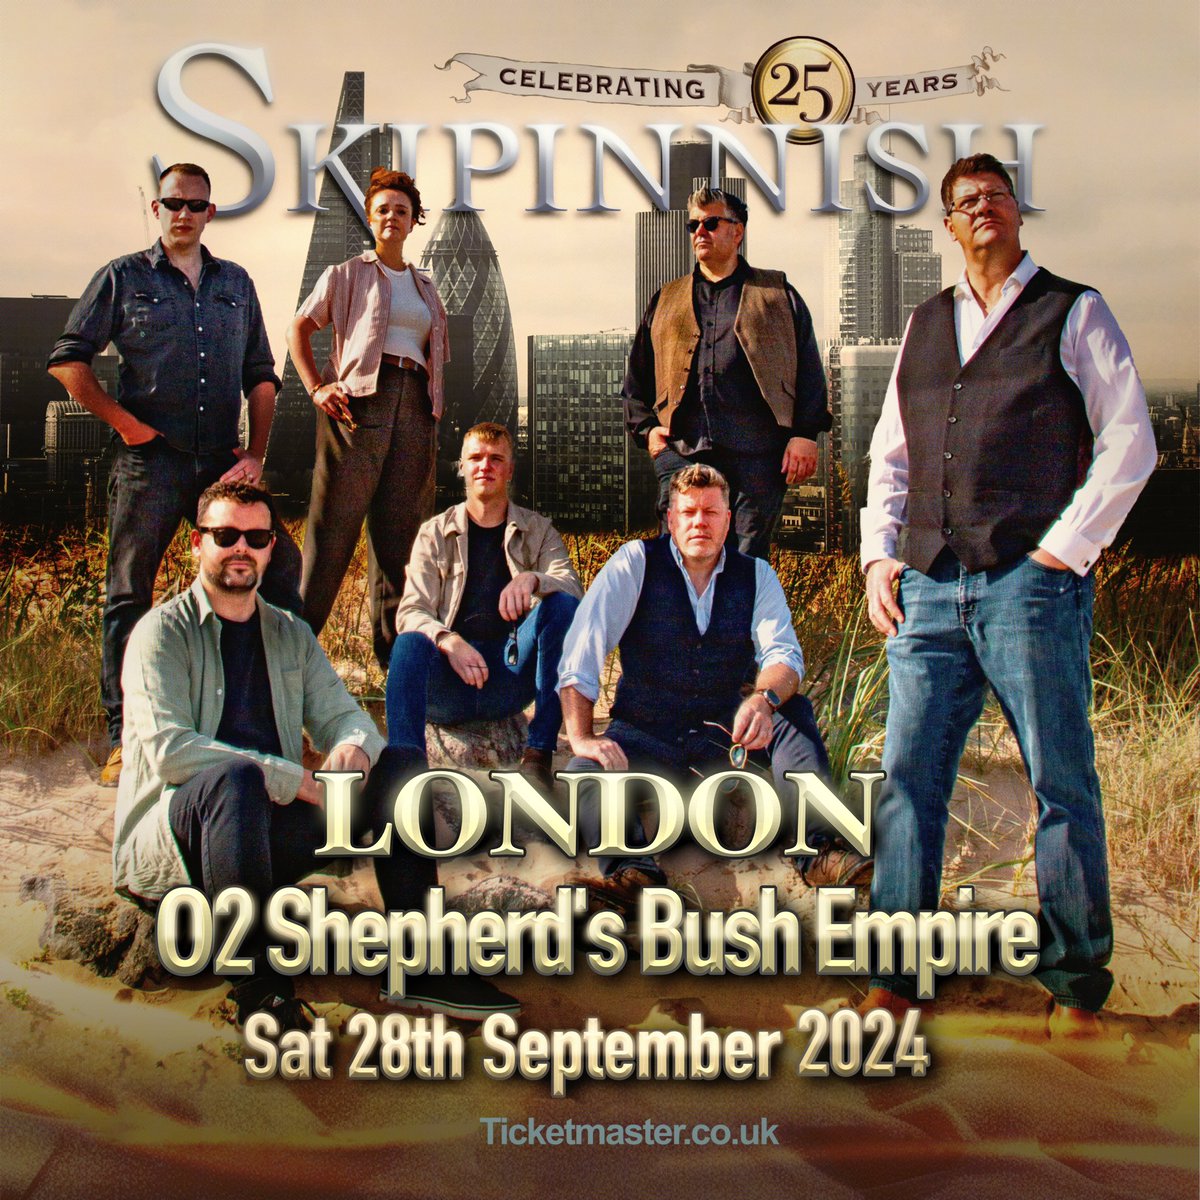 ‼️Big News‼️ We’re thrilled to announce our biggest ever gig outside Scotland! On Sat 28th Sept, Skipinnish will play the legendary O2 Shepherd’s Bush Empire in London! Tix go on pre-sale this Mon 10 AM, followed by the general sale on Wed 13 Mar at 10 AM.